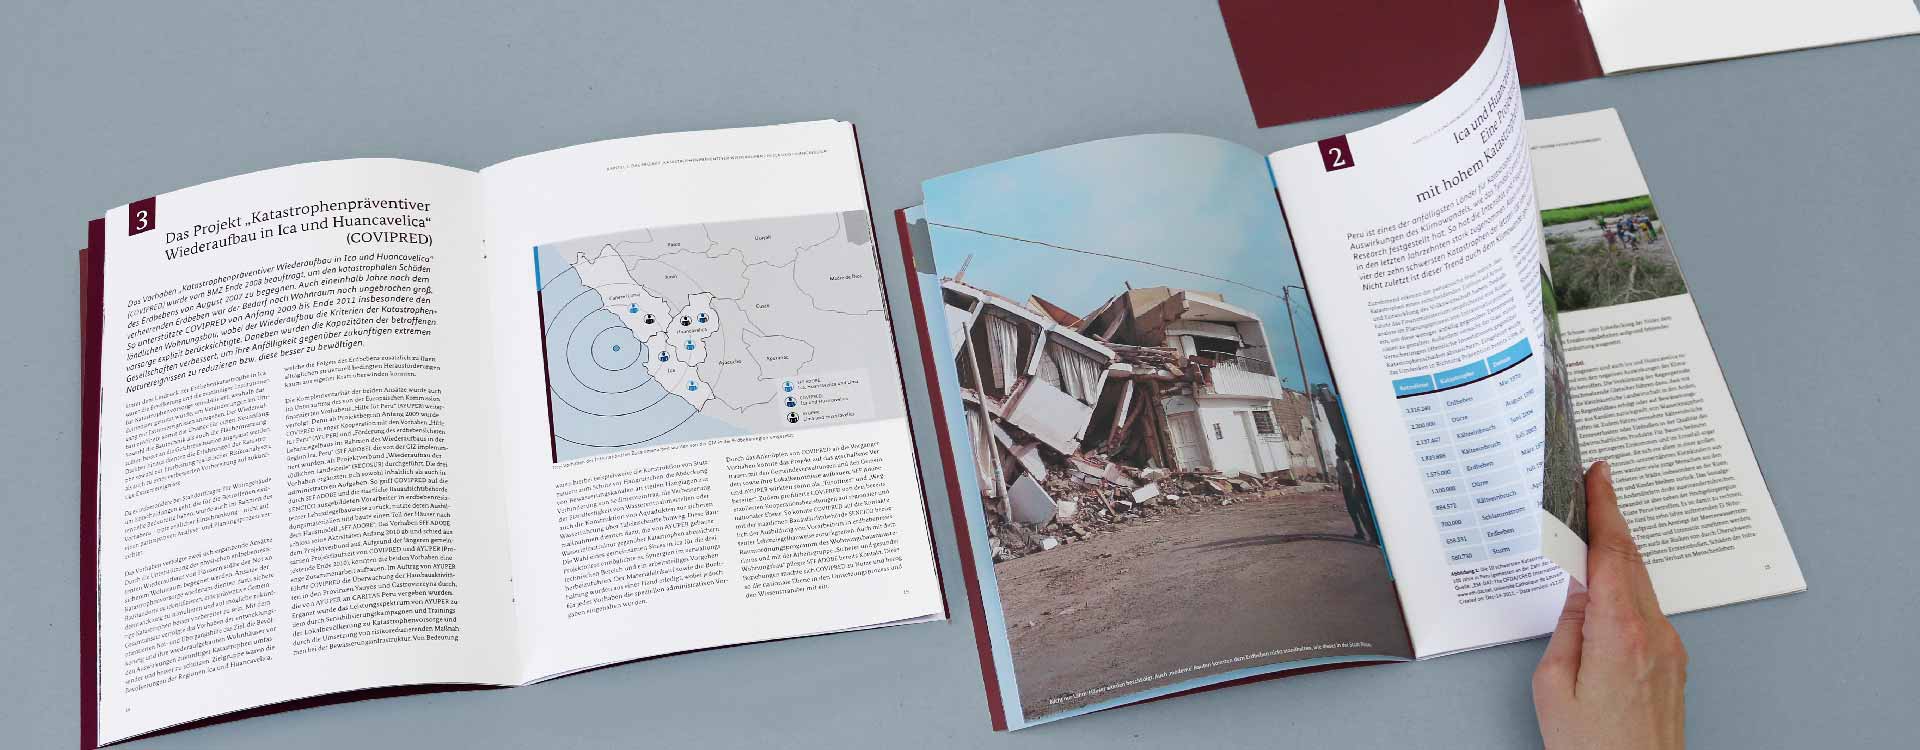 Inside pages of the brochure Disaster Preventive Reconstruction in Peru of the GIZ; Design: Kattrin Richter | Graphic Design Studio